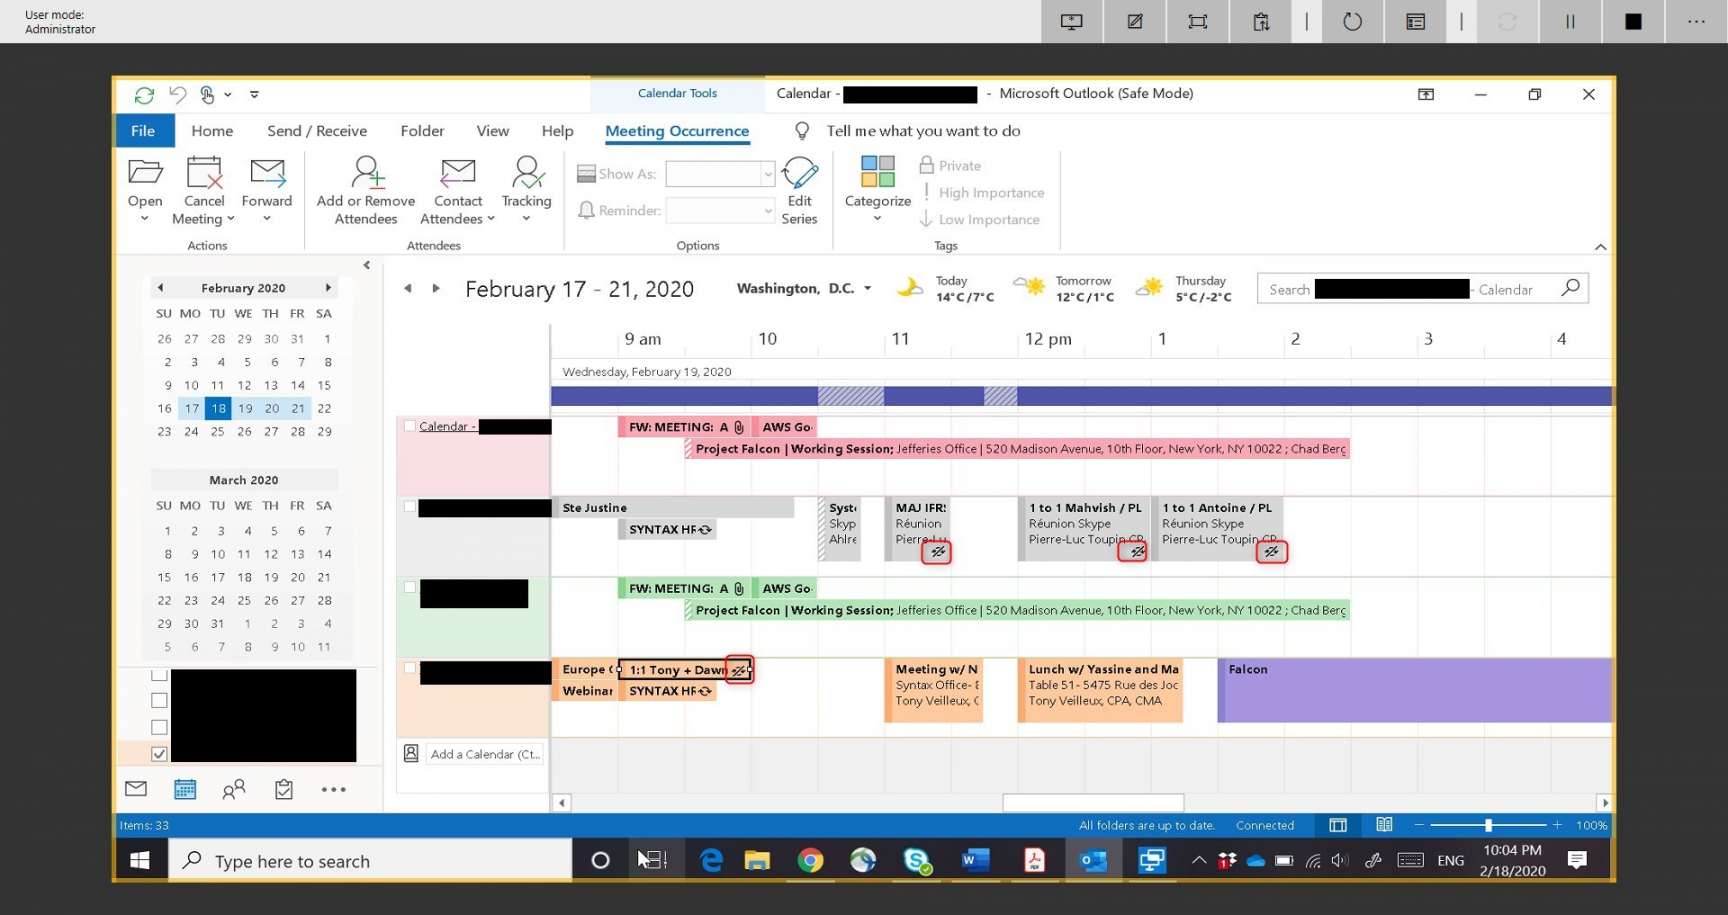 Unable to SYNC meetings on Outlook Calendar - Microsoft Community